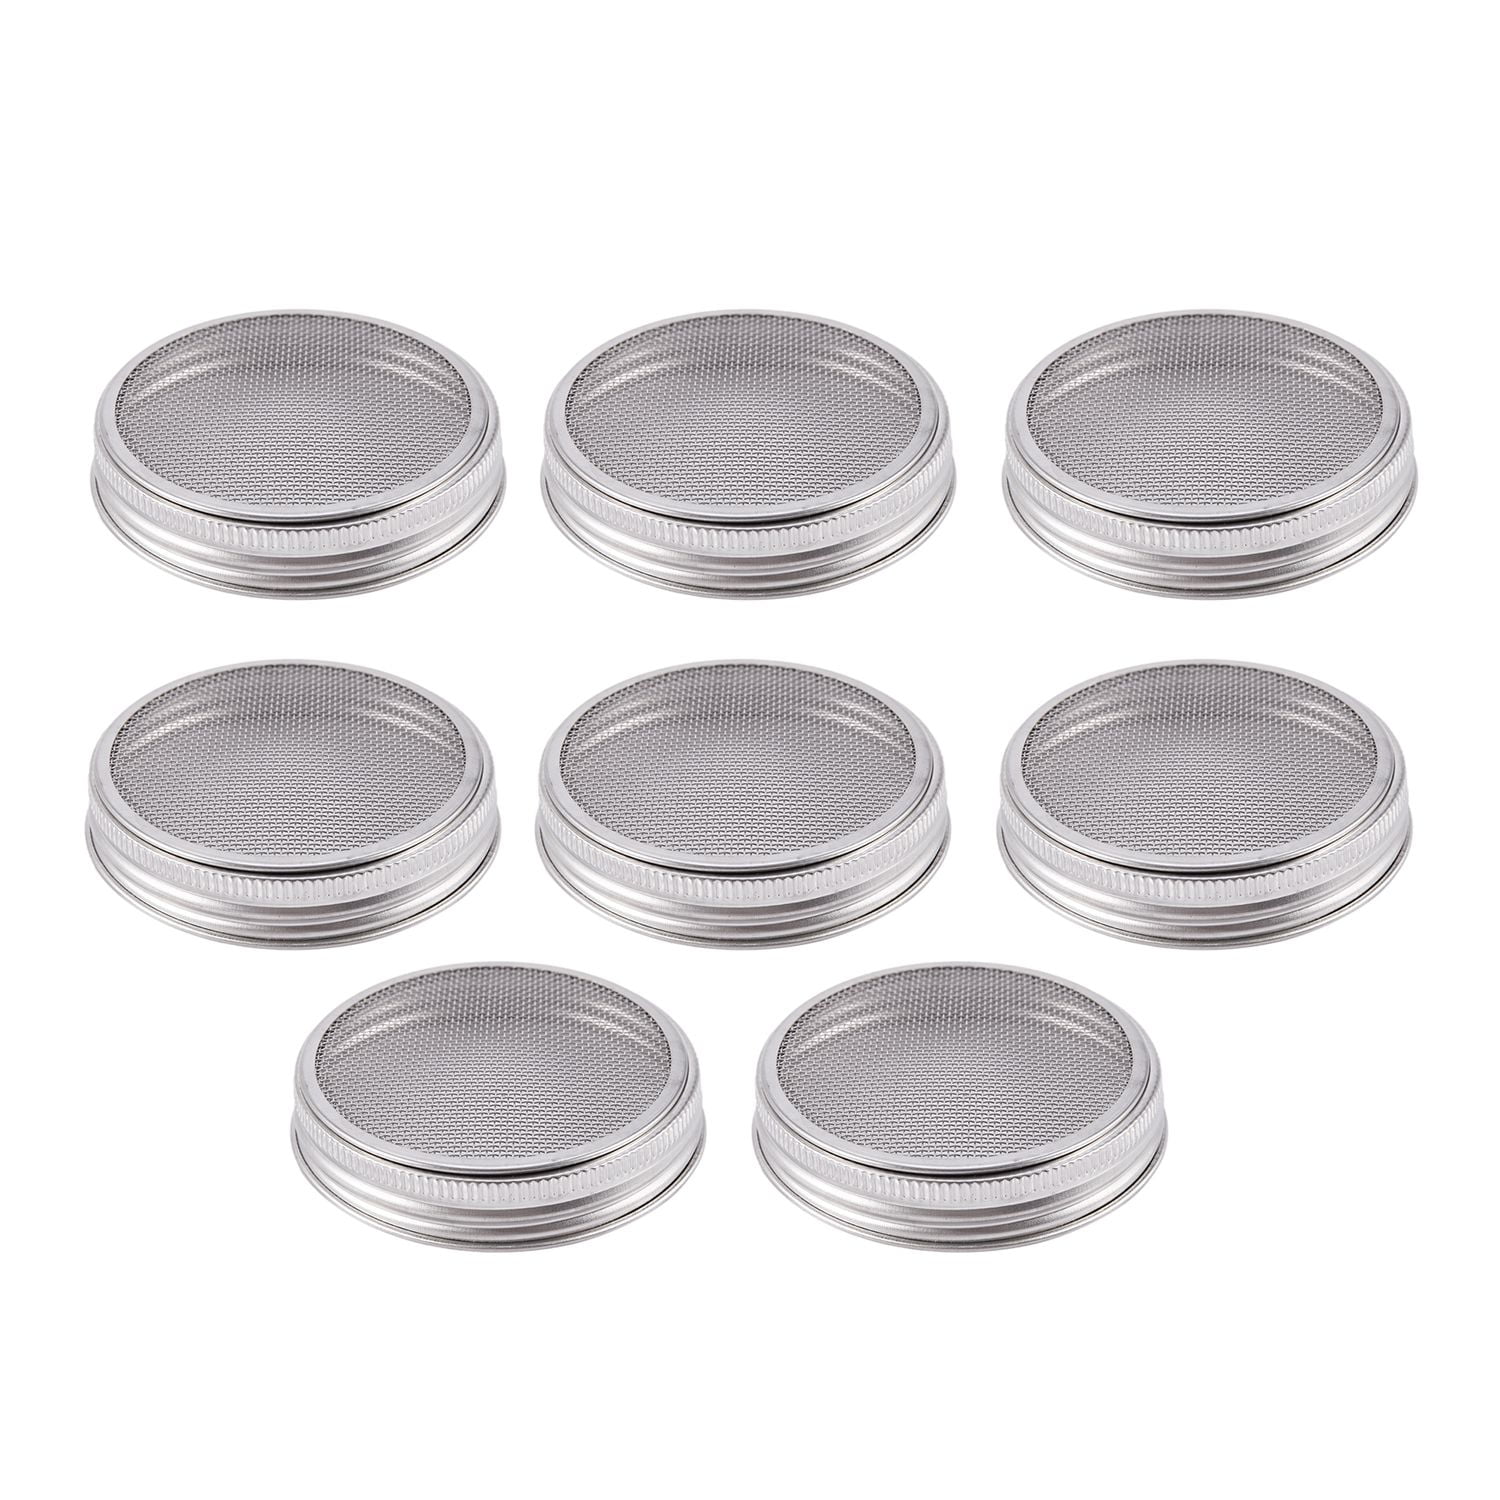 5PCS Stainless Steel Lids Strainer Sprouting Screen Filter for Mason Jar Canning 